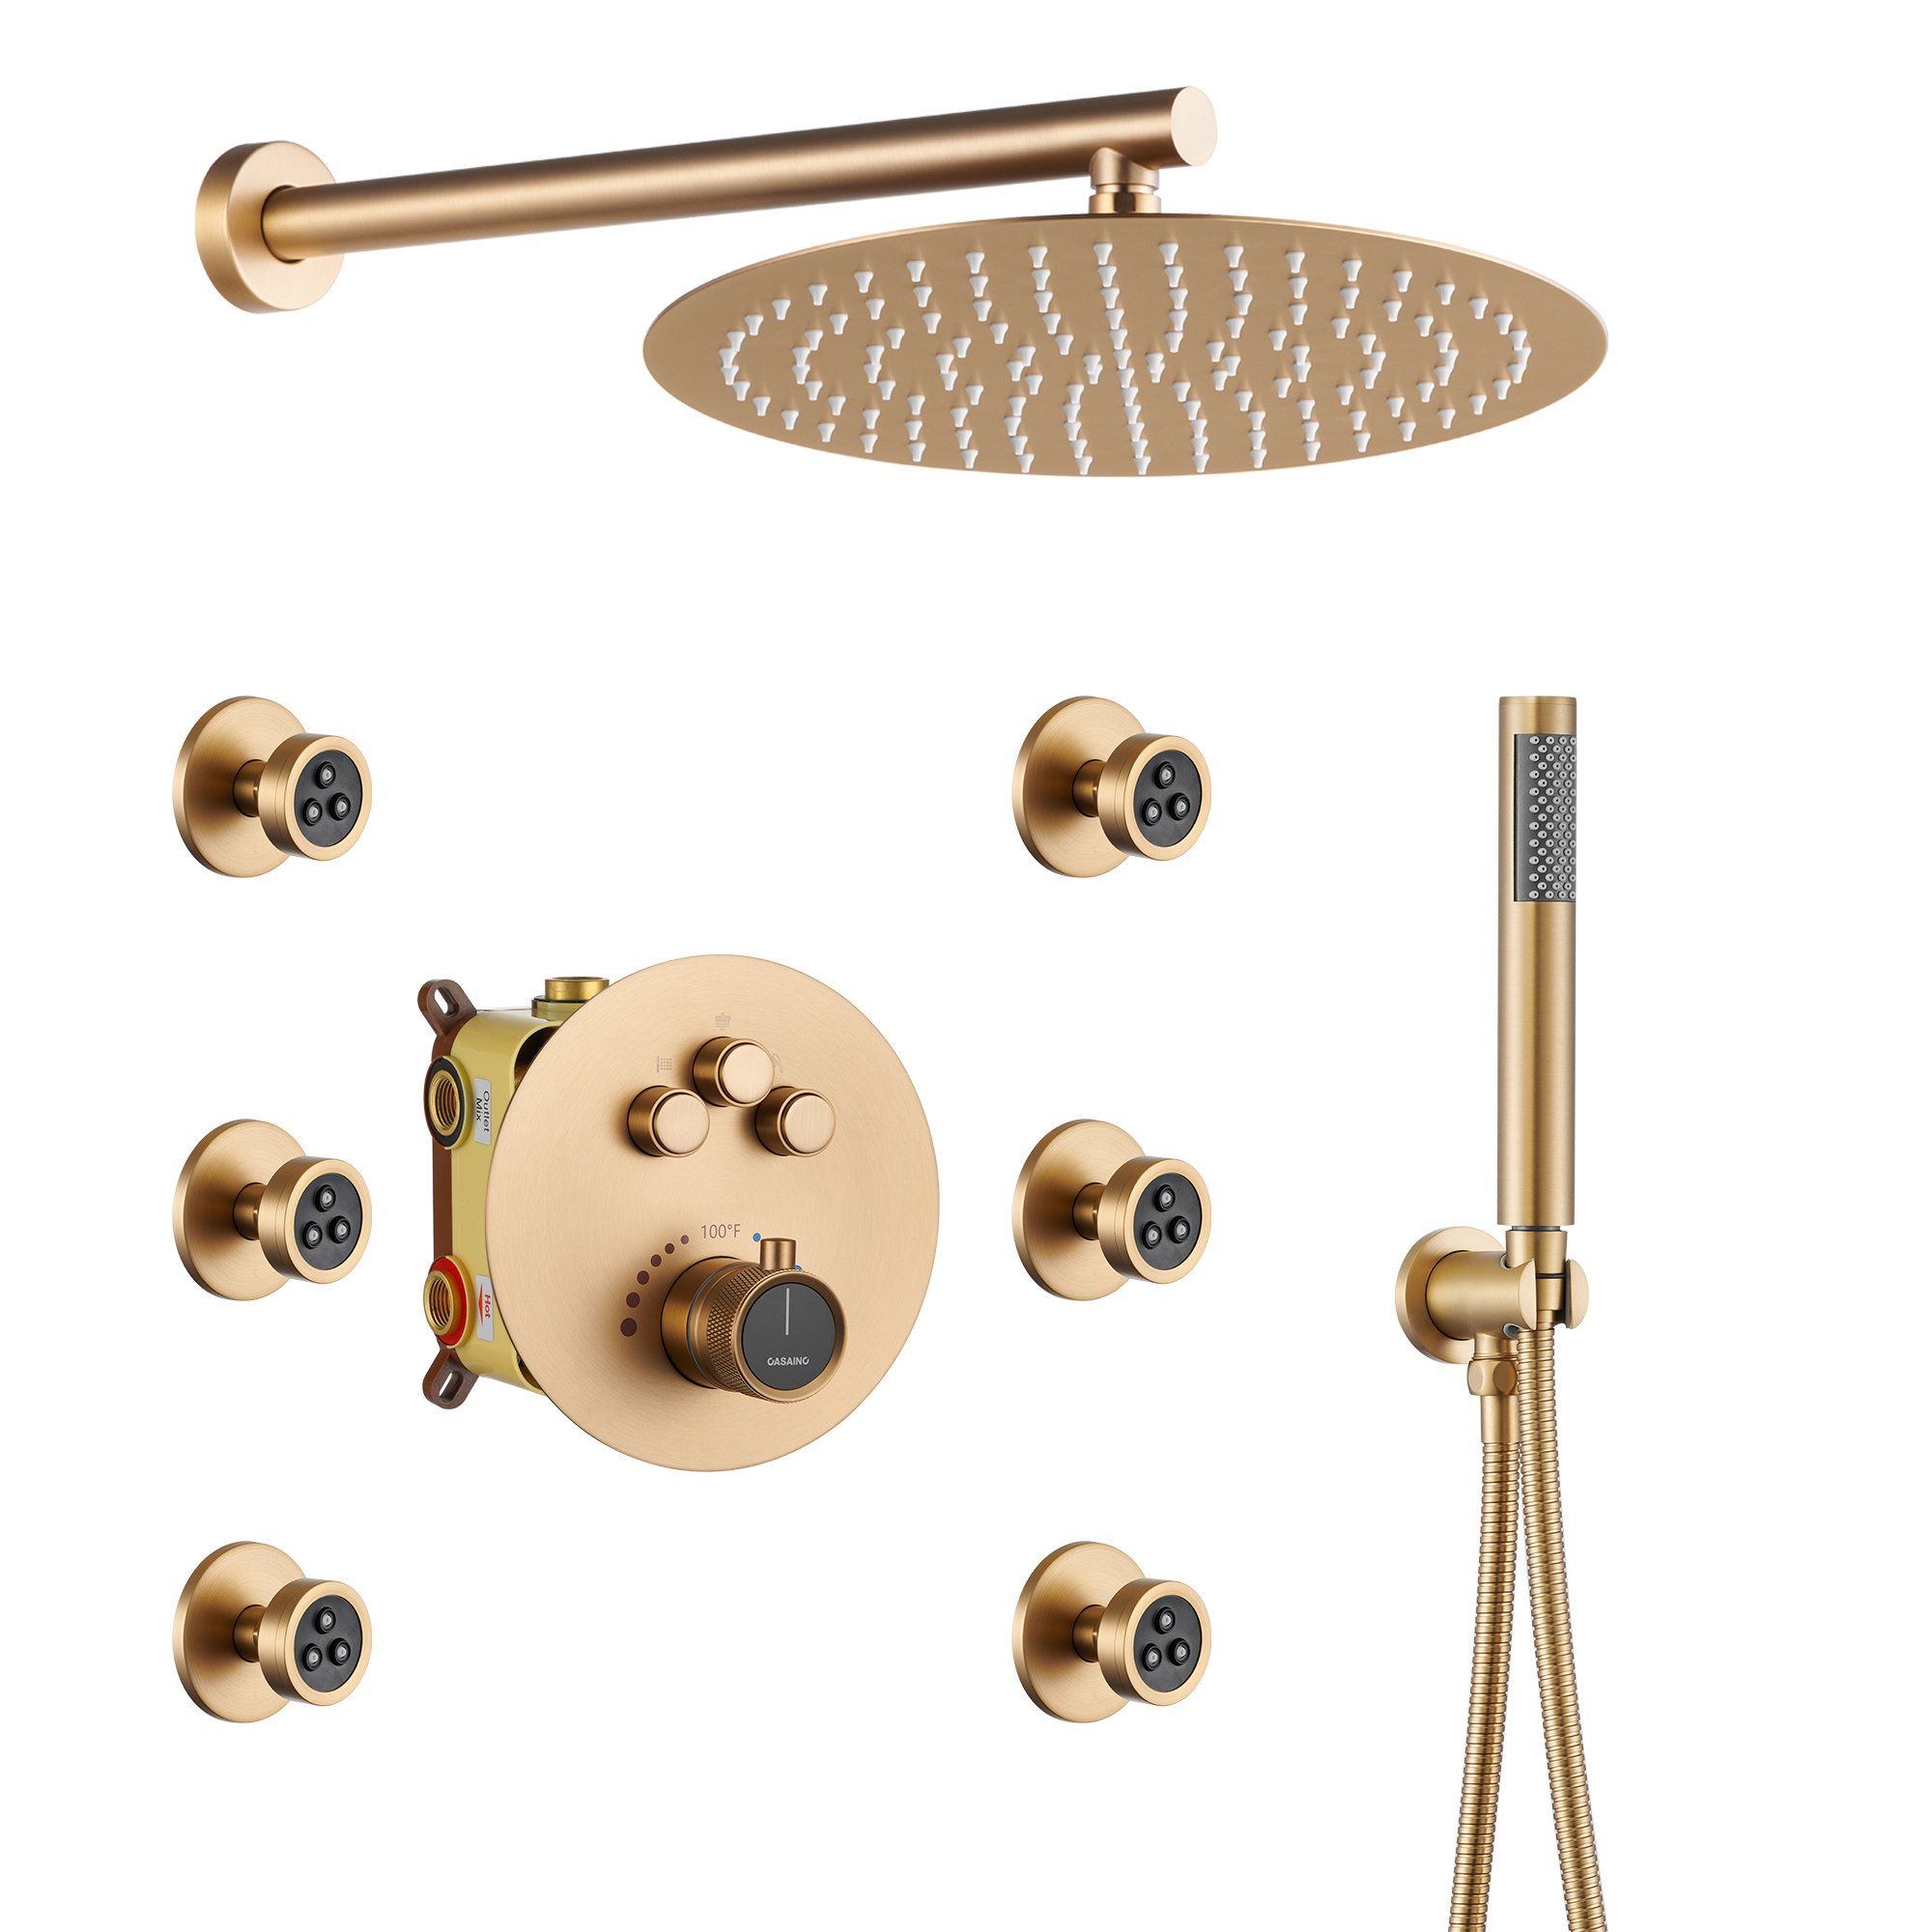 Push-Button Control High Quality Luxury Showerhead 12-Inch Thermostatic Rainfall Gold Shower Systems with Body Sprays and Pressure Balanced Valve